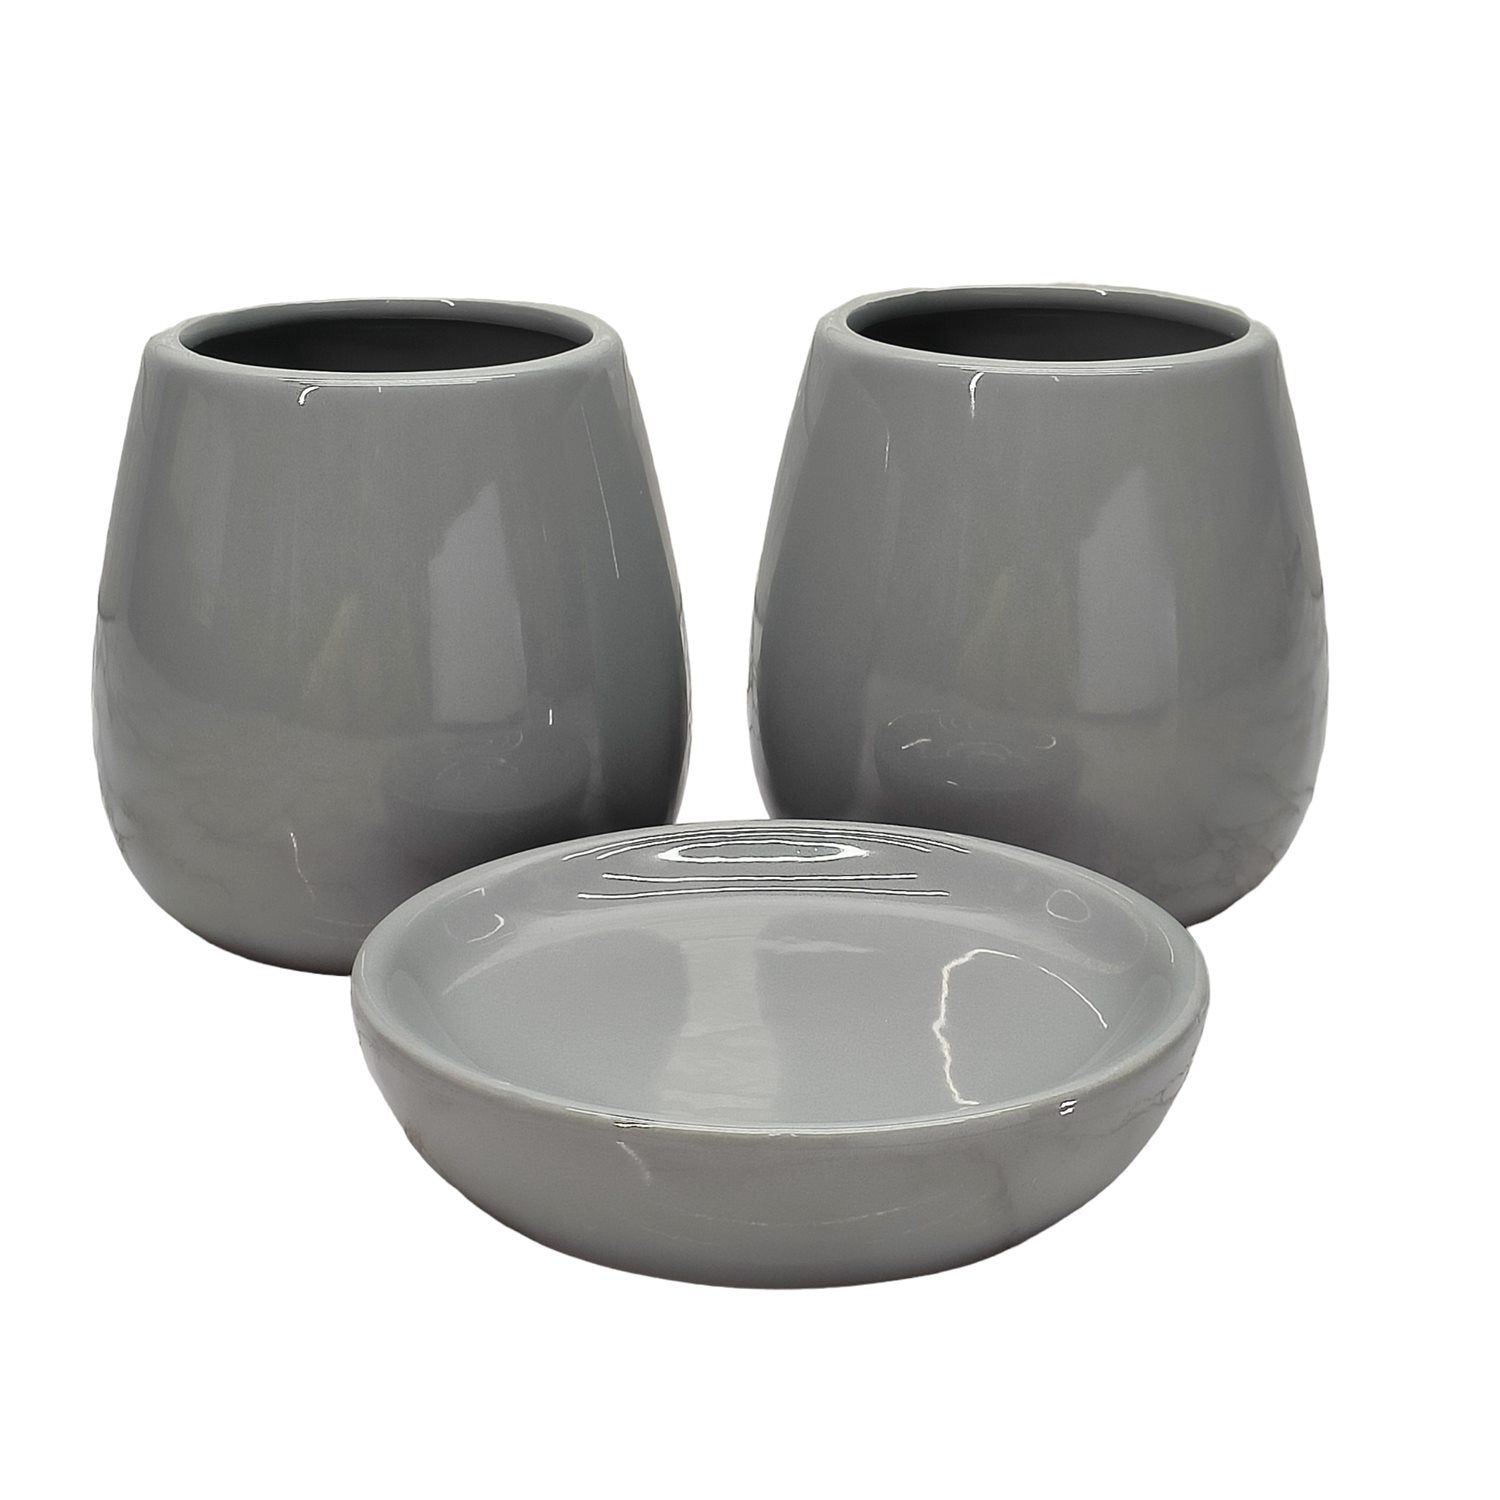 Ceramic Soap Dish Set with Toothbrush Holder and Tumbler, Set of 3 Bathroom Accessories for Home (C3086)